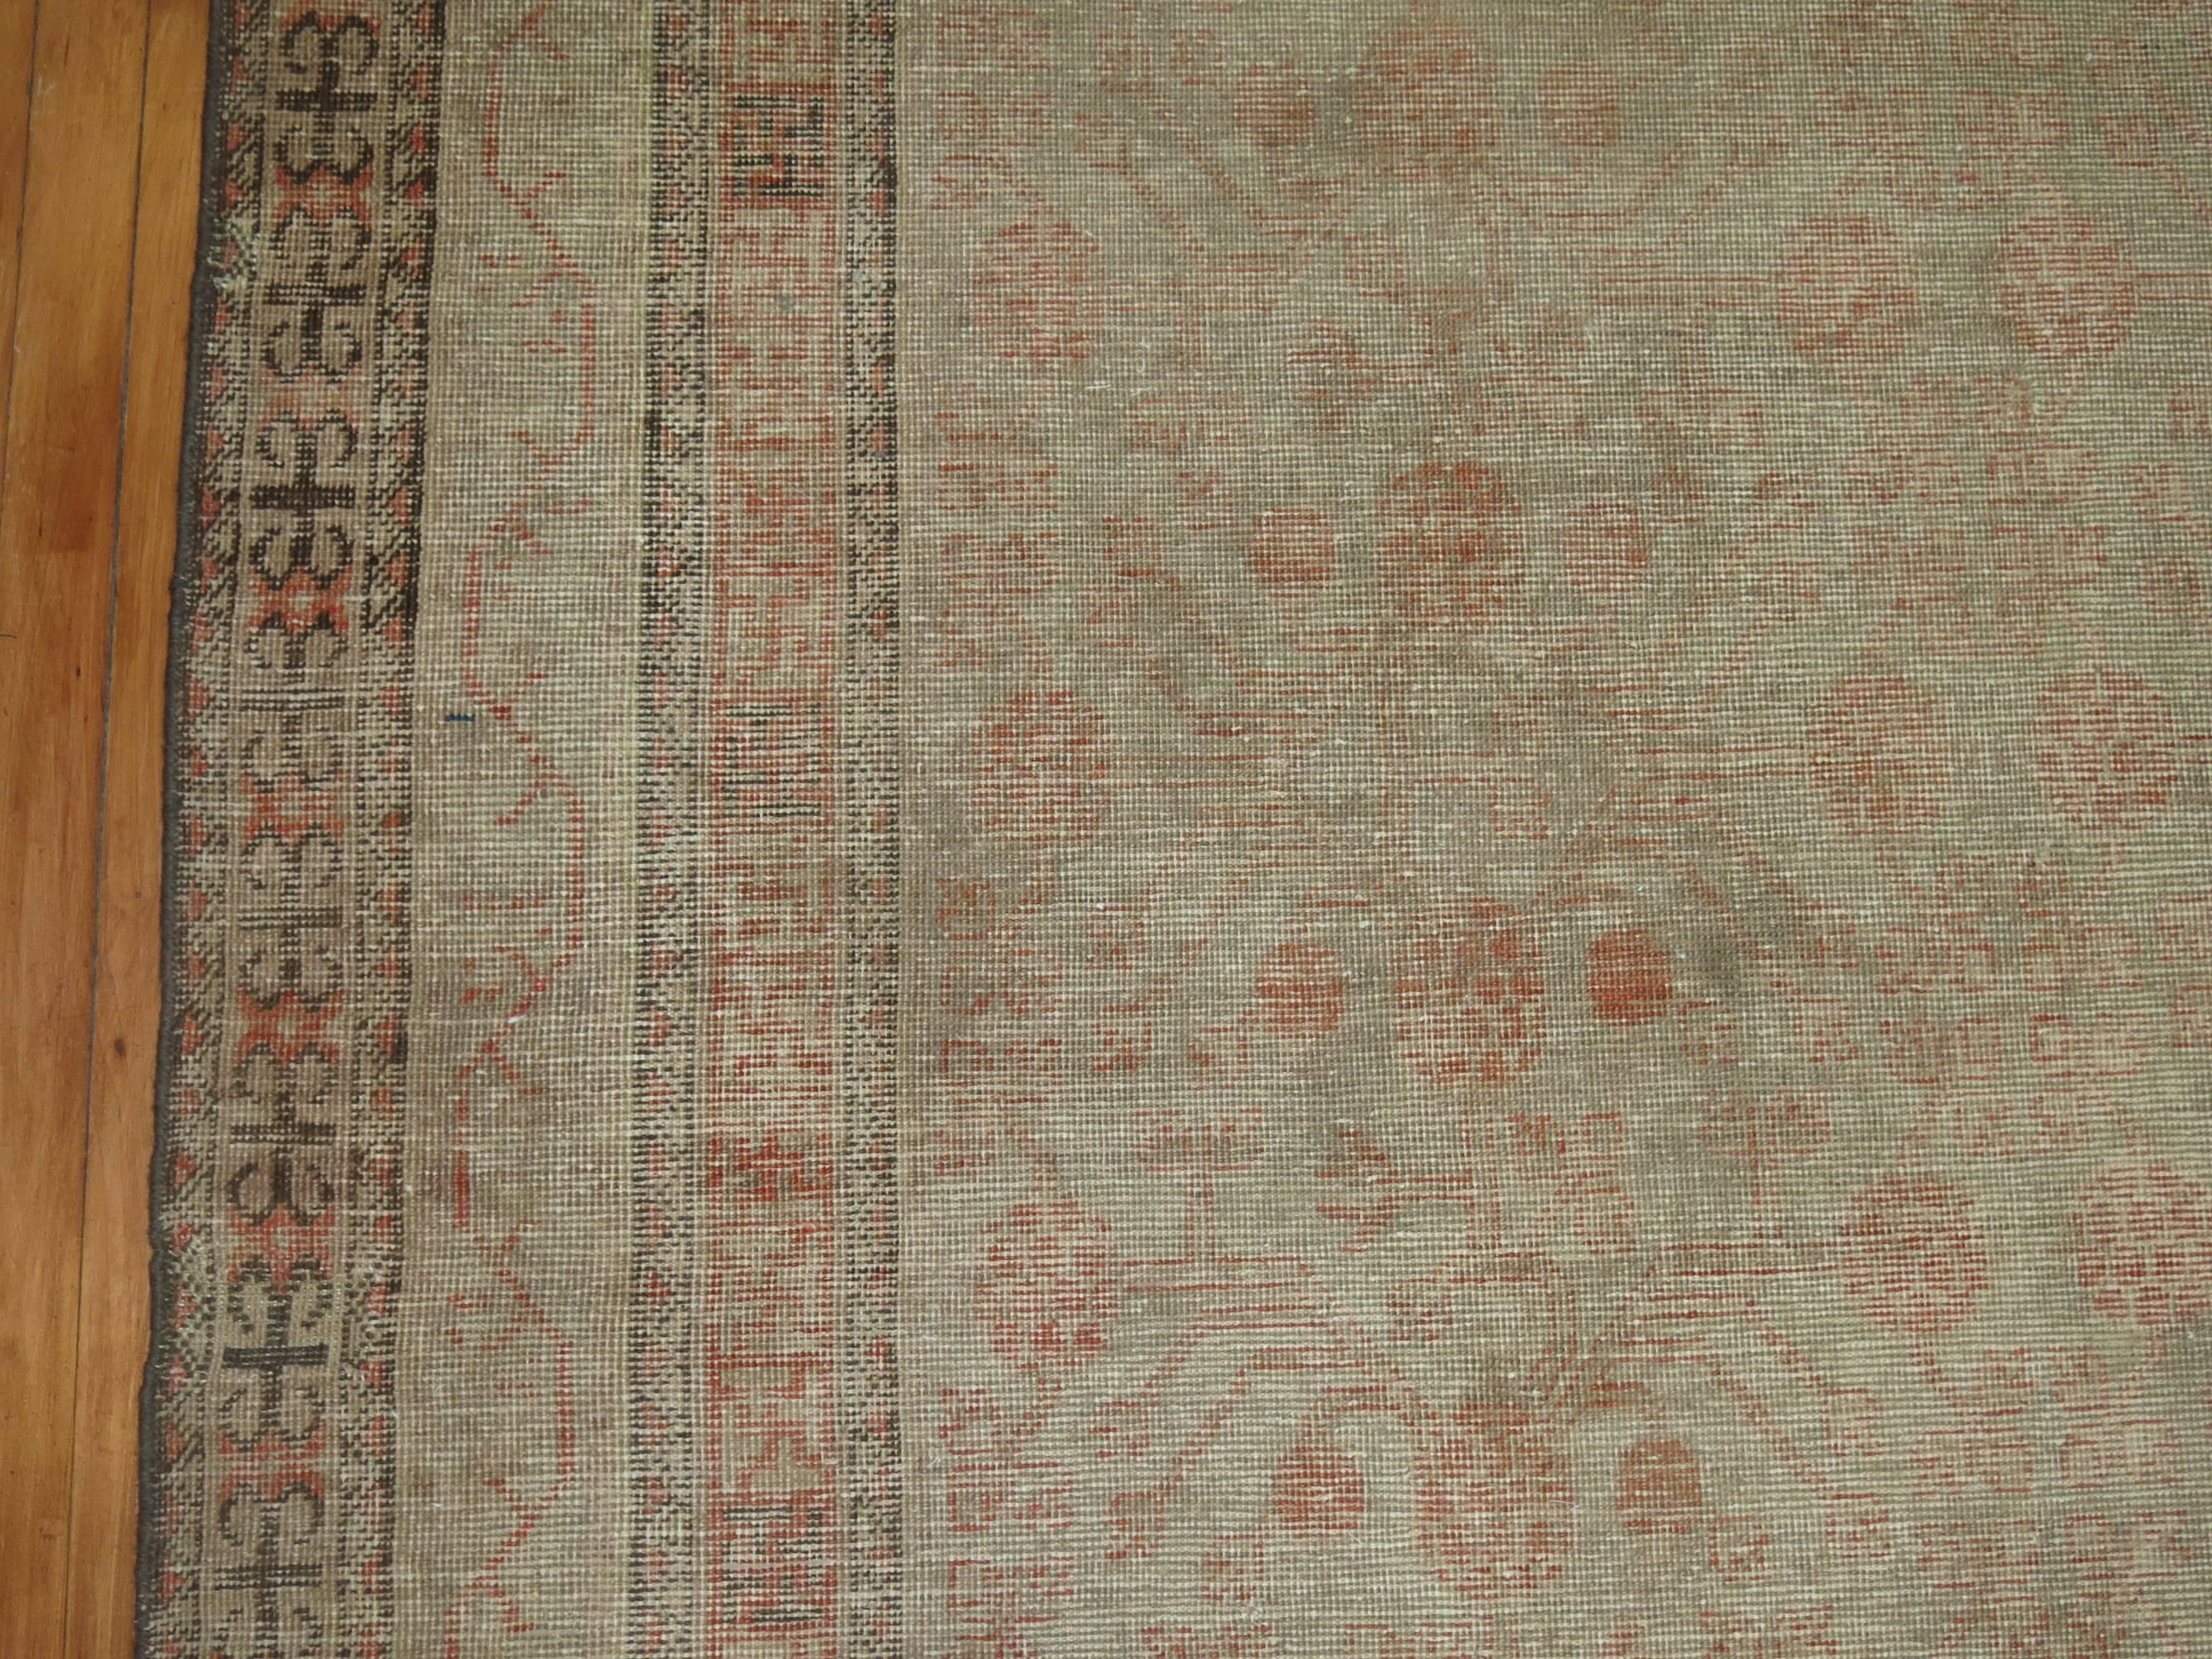 Faded Distressed Khotan rug in a gallery format,

circa late 19th century, measures: 6'3